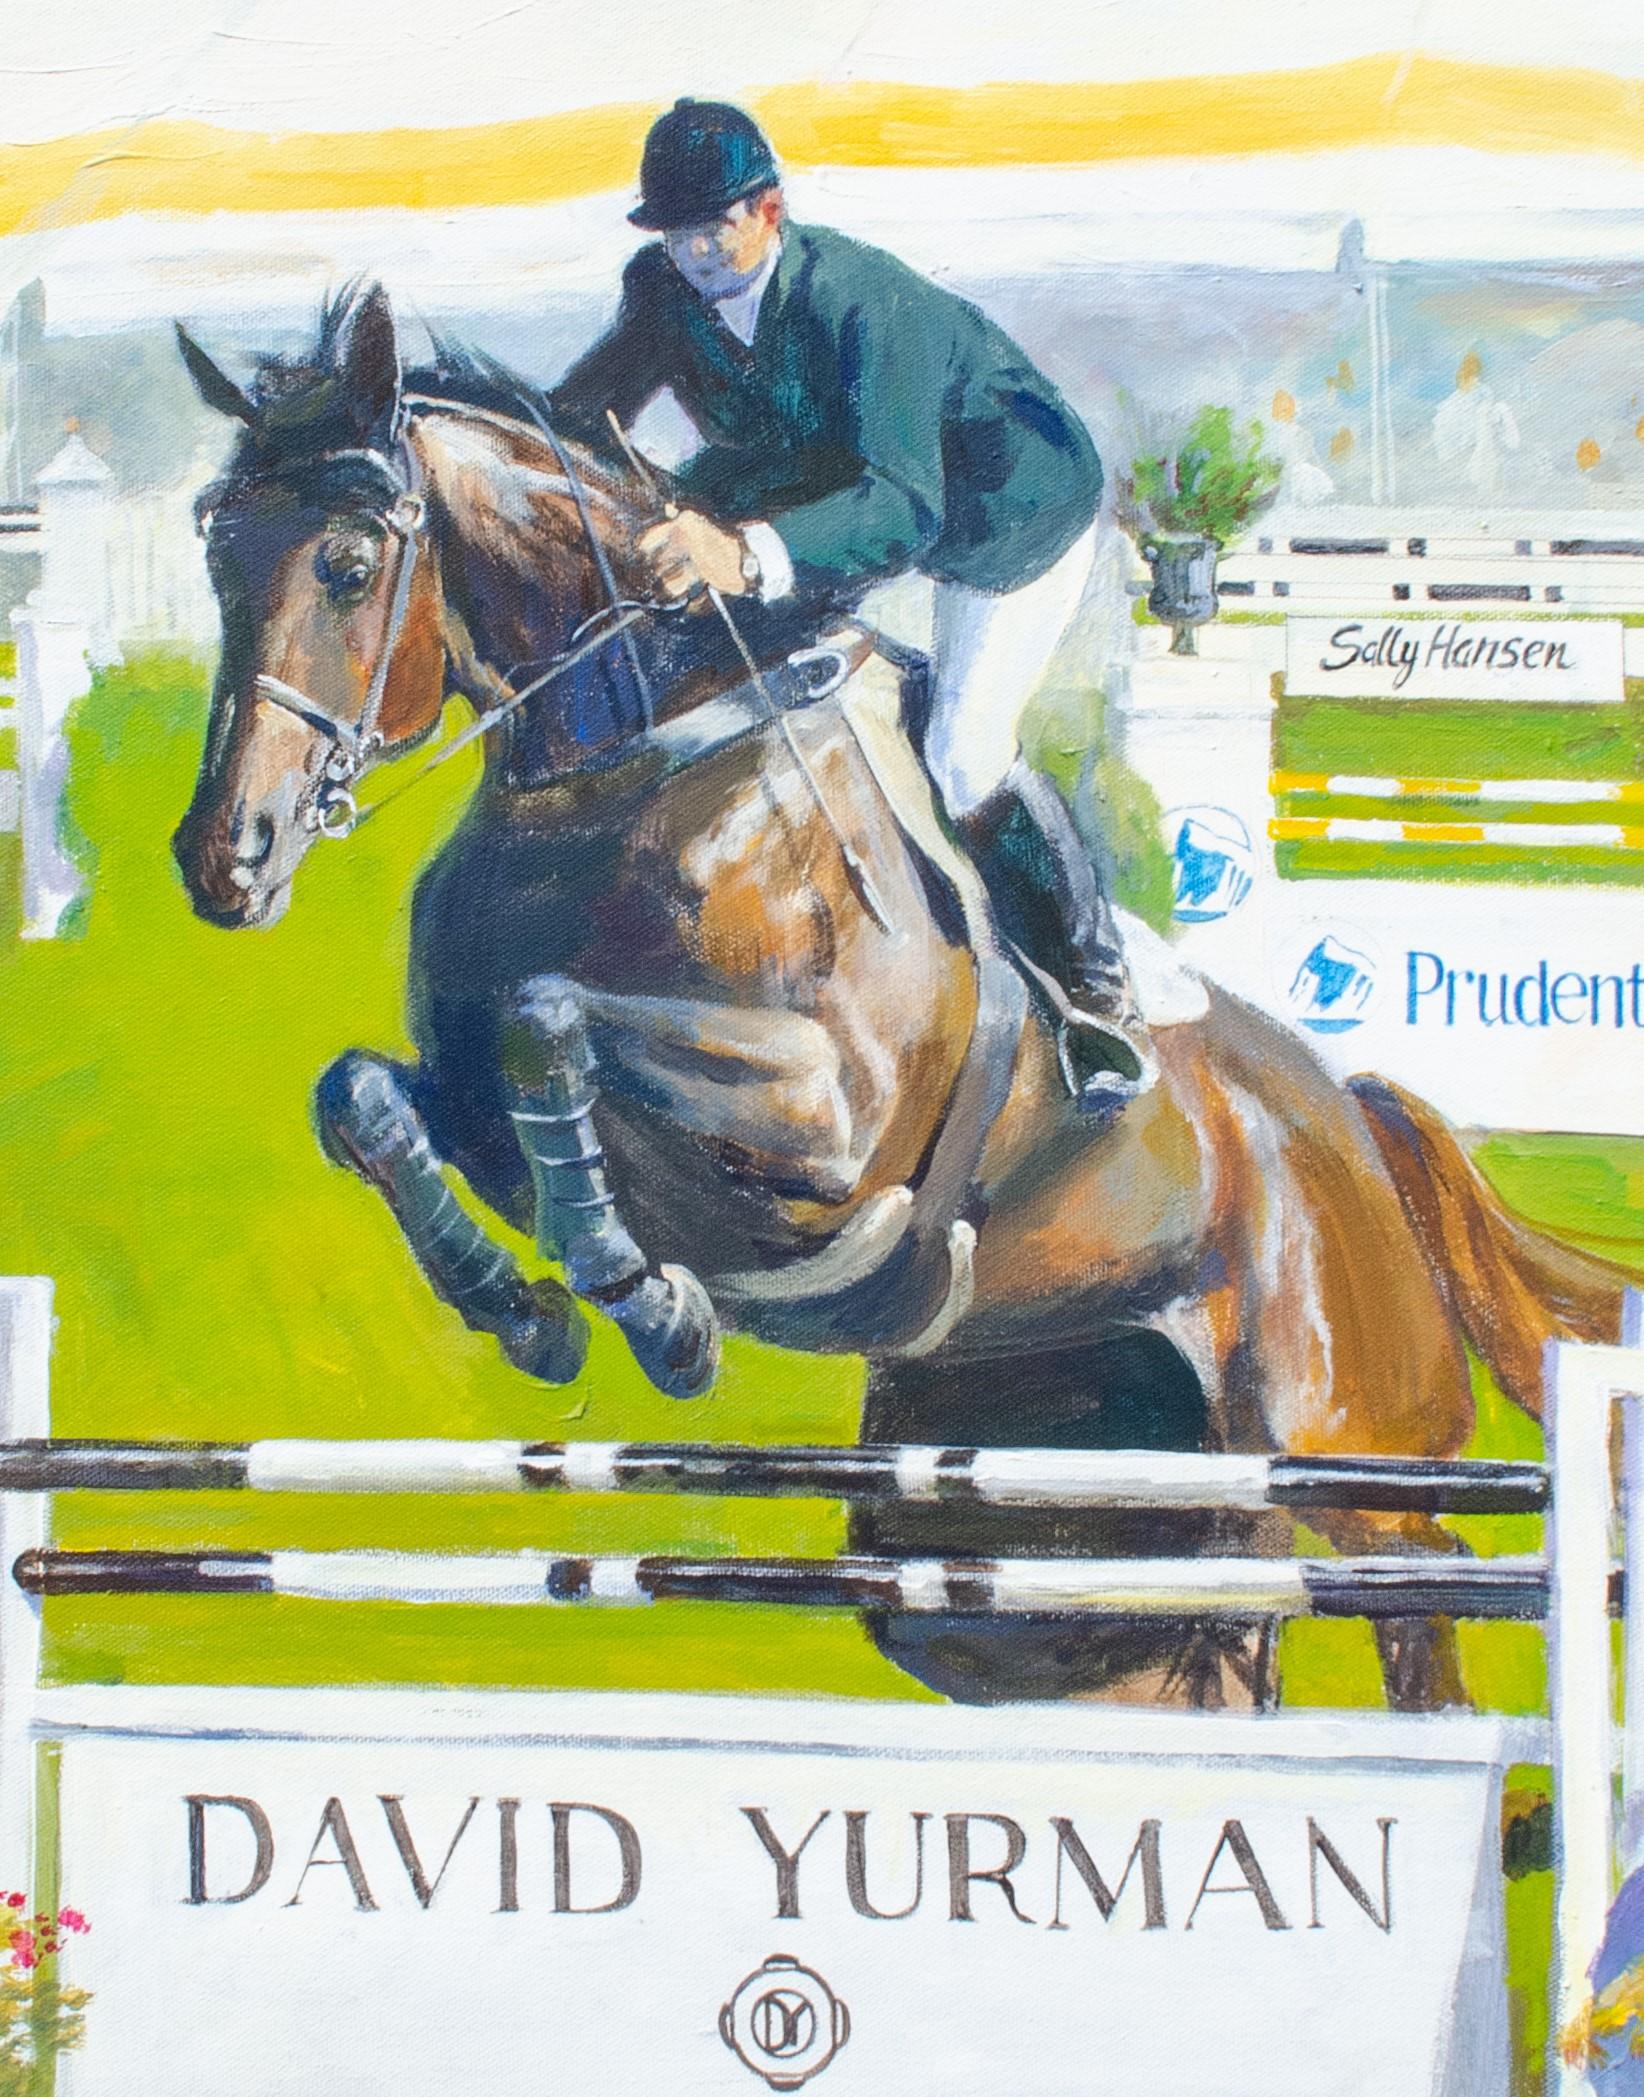 Leonid Gervits (Russian/American)
Untitled (Show Jumping), 2000
Oil on canvas
28 x 22 in.
Initialed and dated lower left: LG 00

Leonid Gervits was born April 12, 1946 in a middle class “intelligensia” family in the former Soviet Union. The artist’s